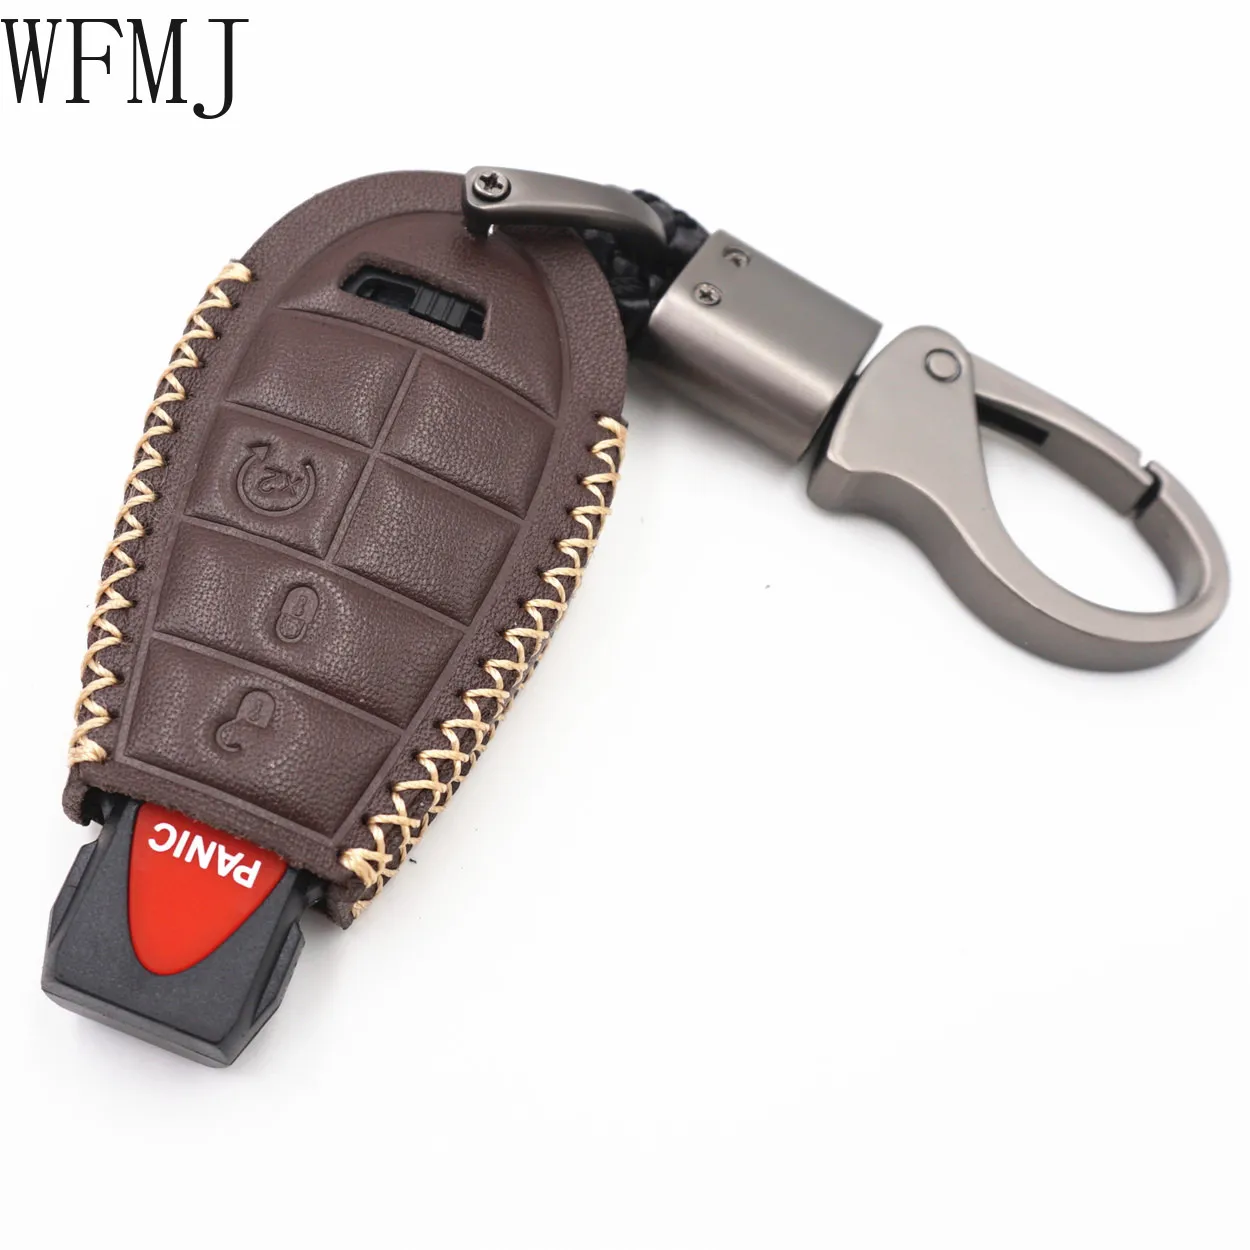 WFMJ Brown Leather for Chrysler 300 Dodge Grand Caravan Journey Magnum Ram Jeep Grand Cherokee 4 Buttons Key Fob Case Cover